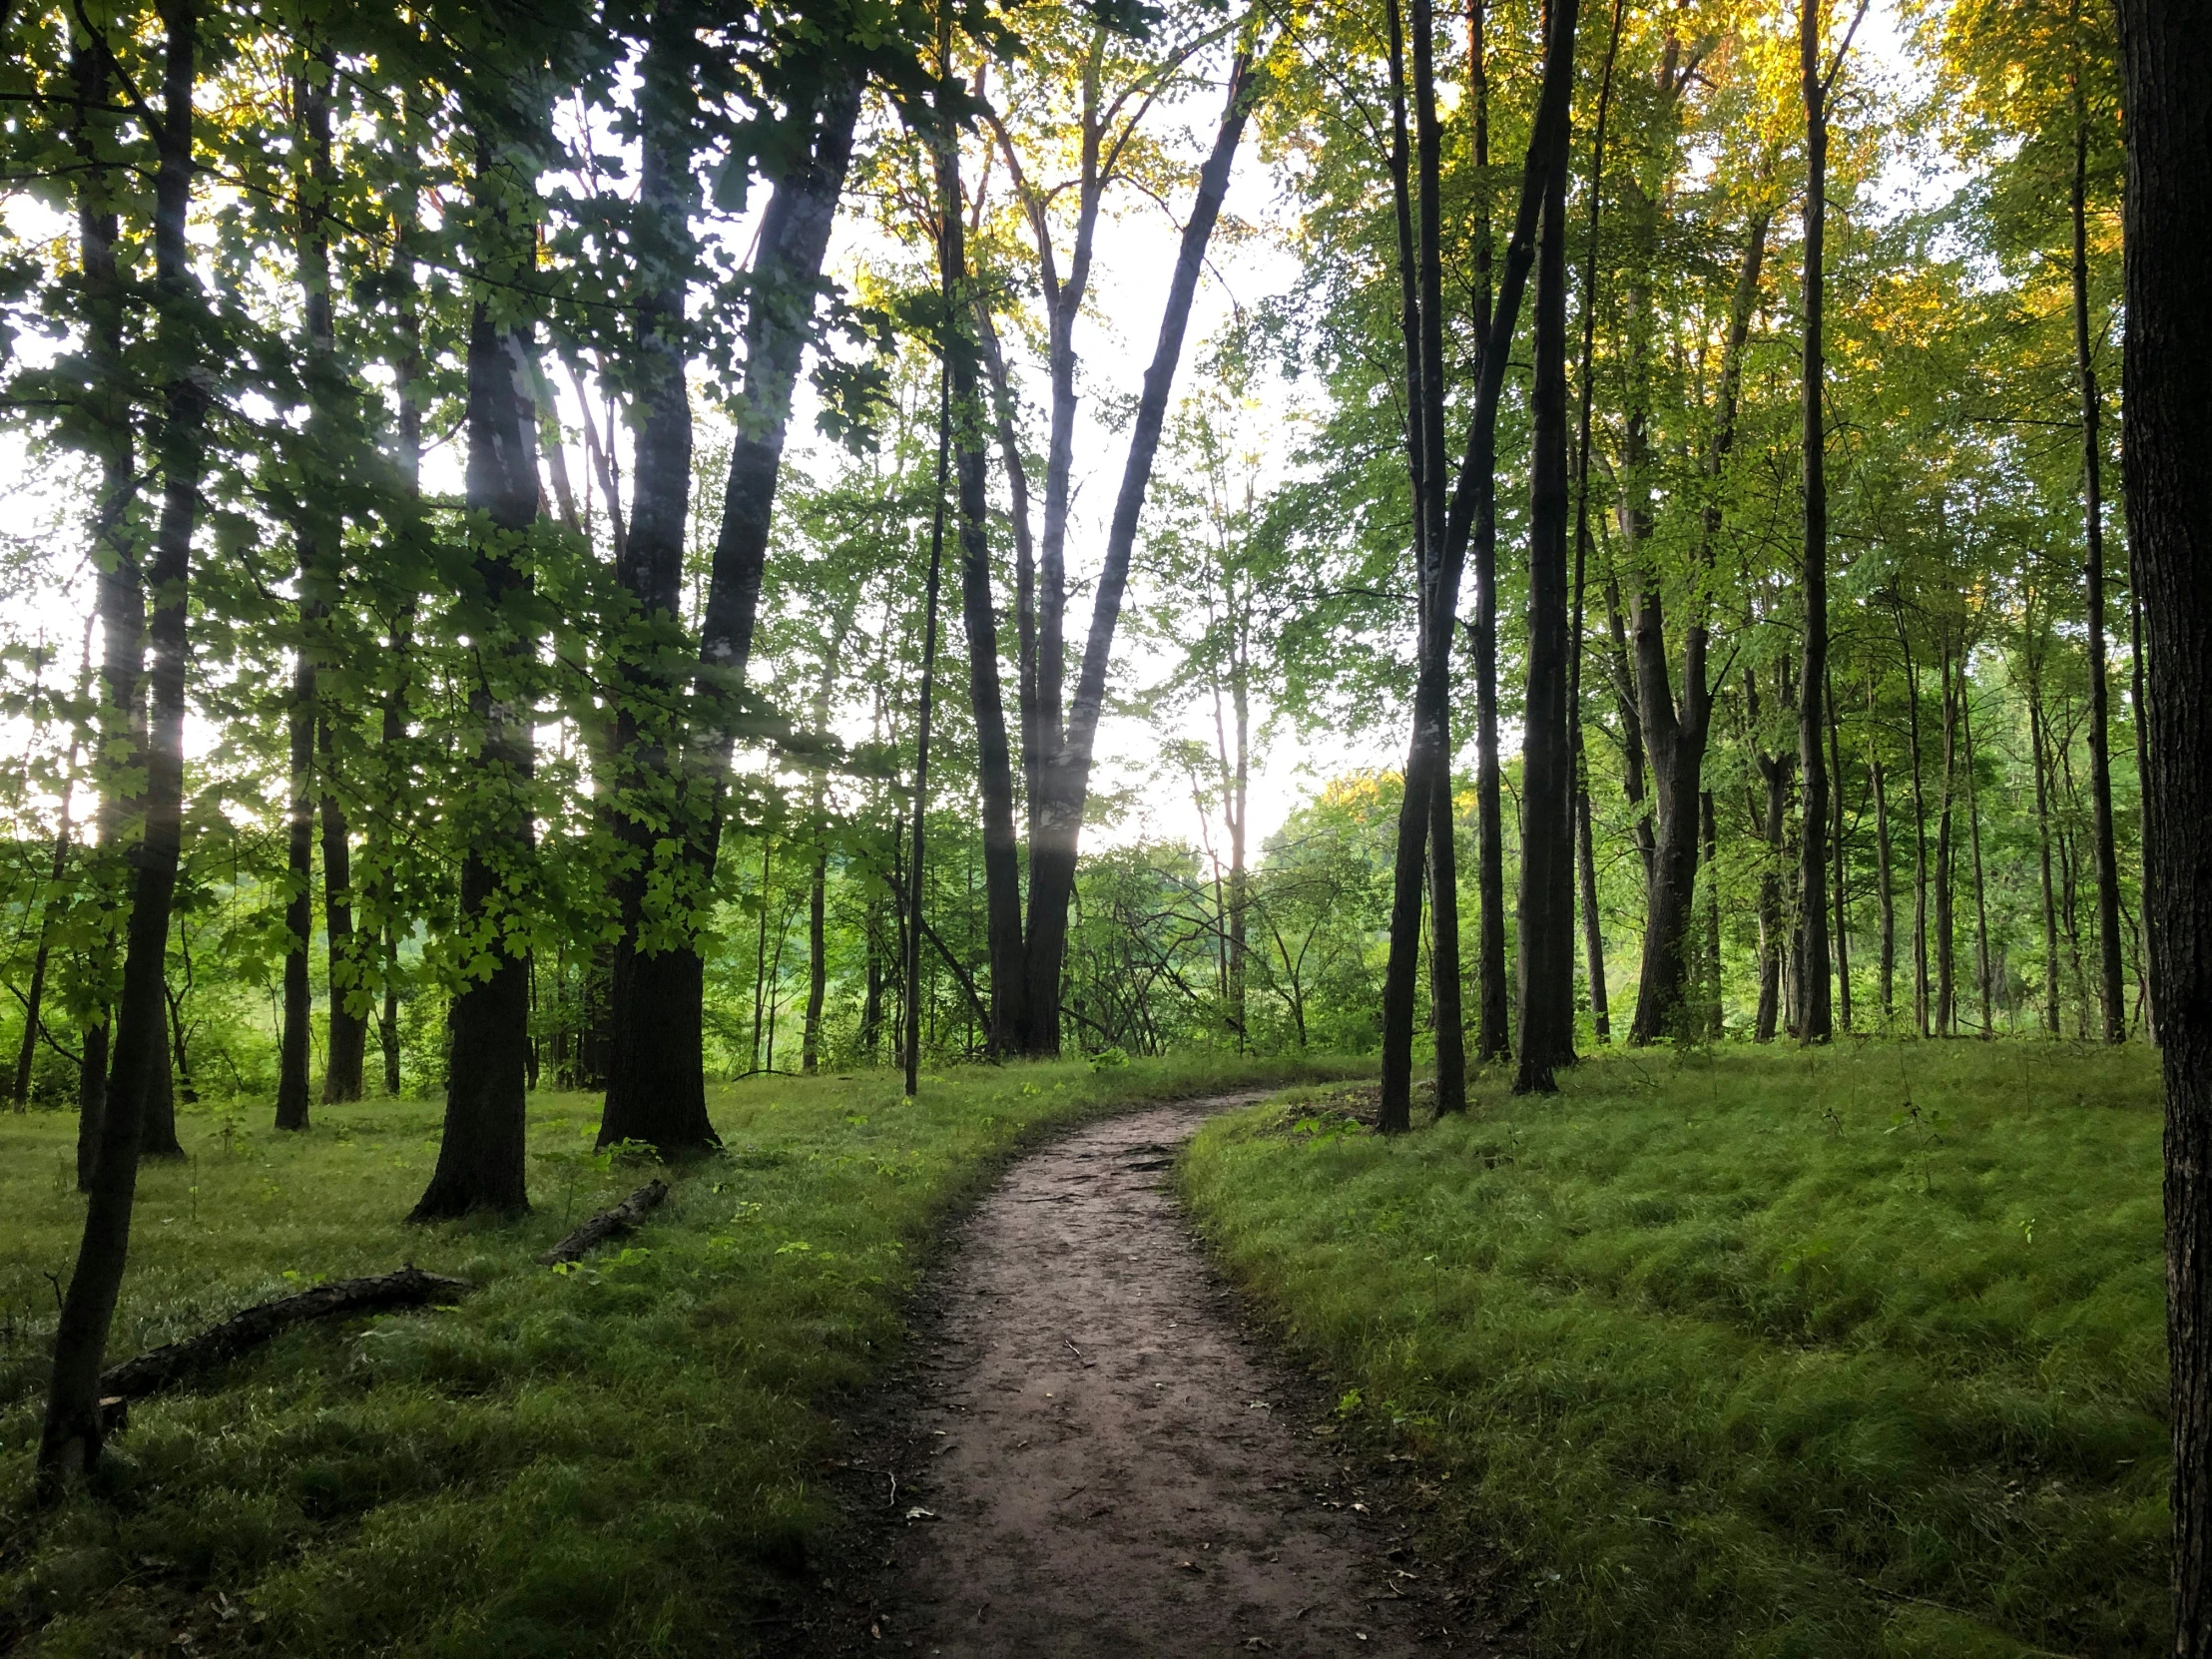 a path running through a forest with lots of trees